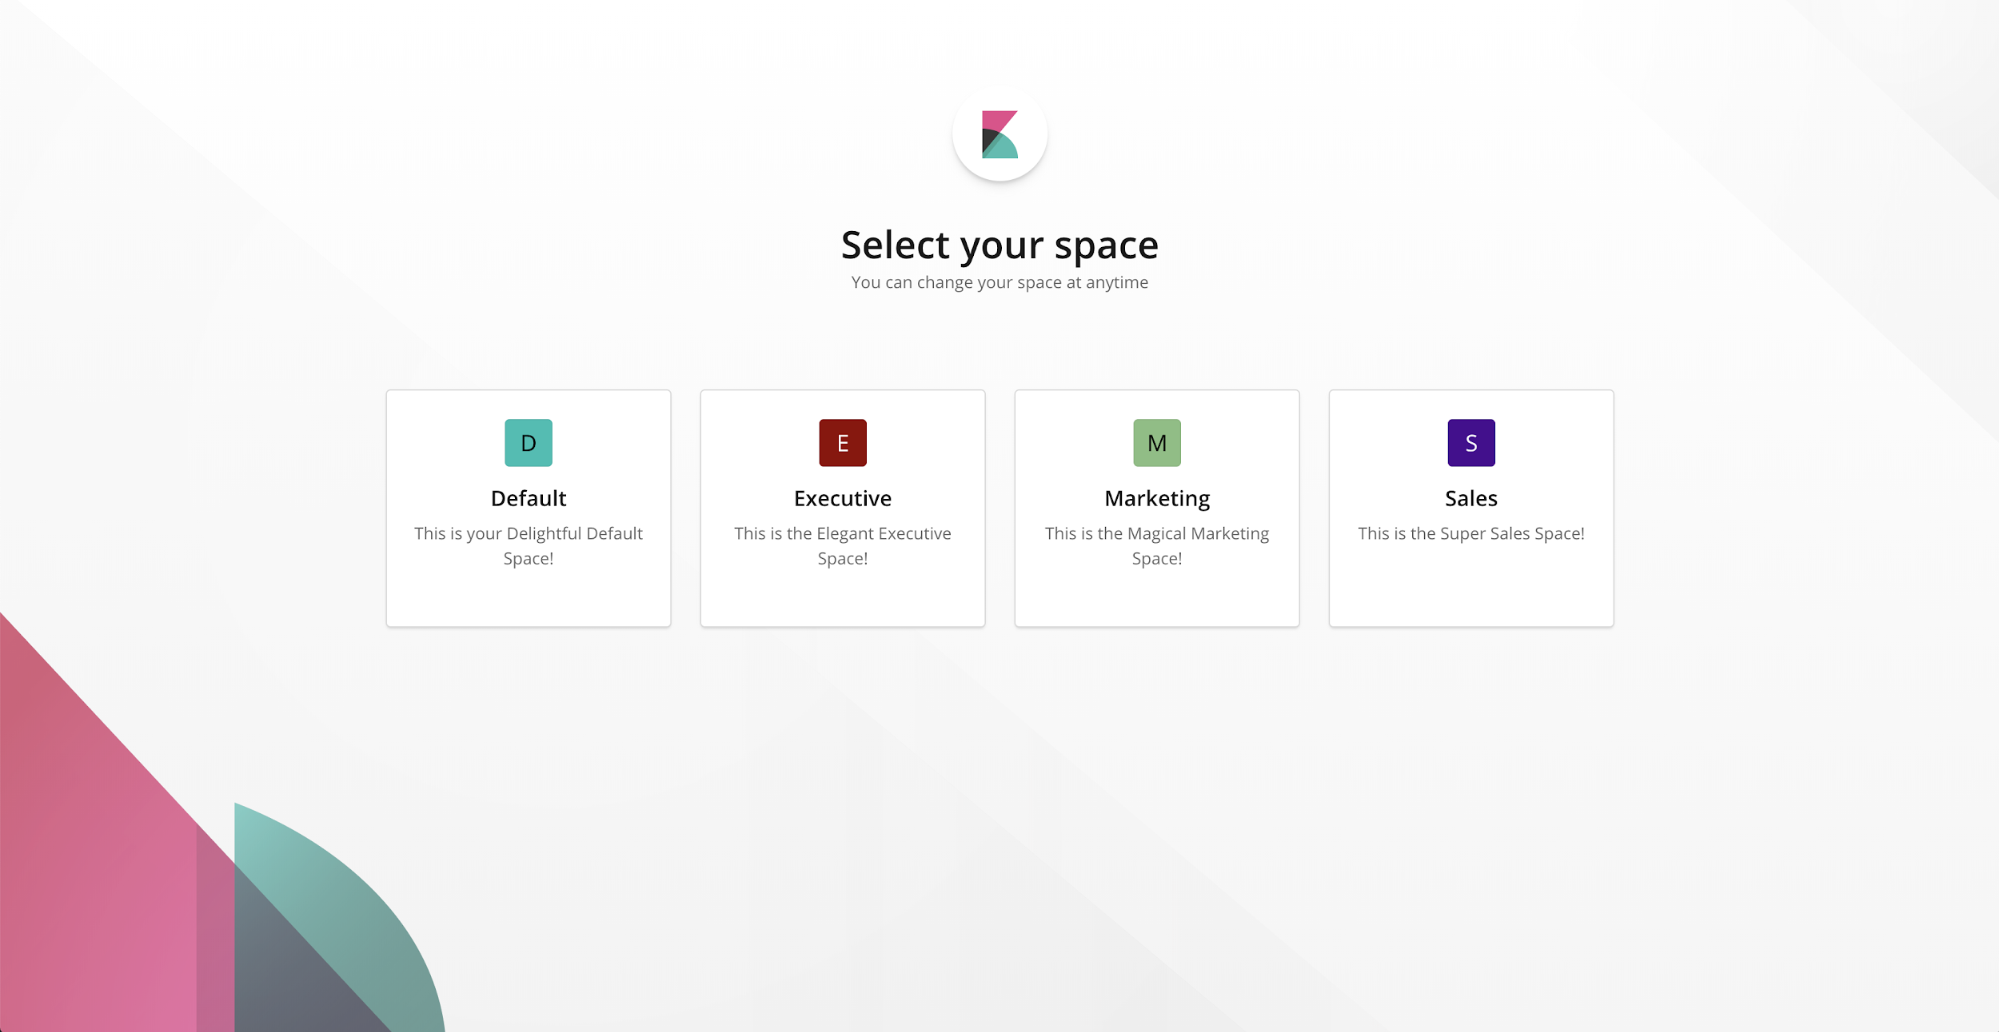 Select your space dashboard